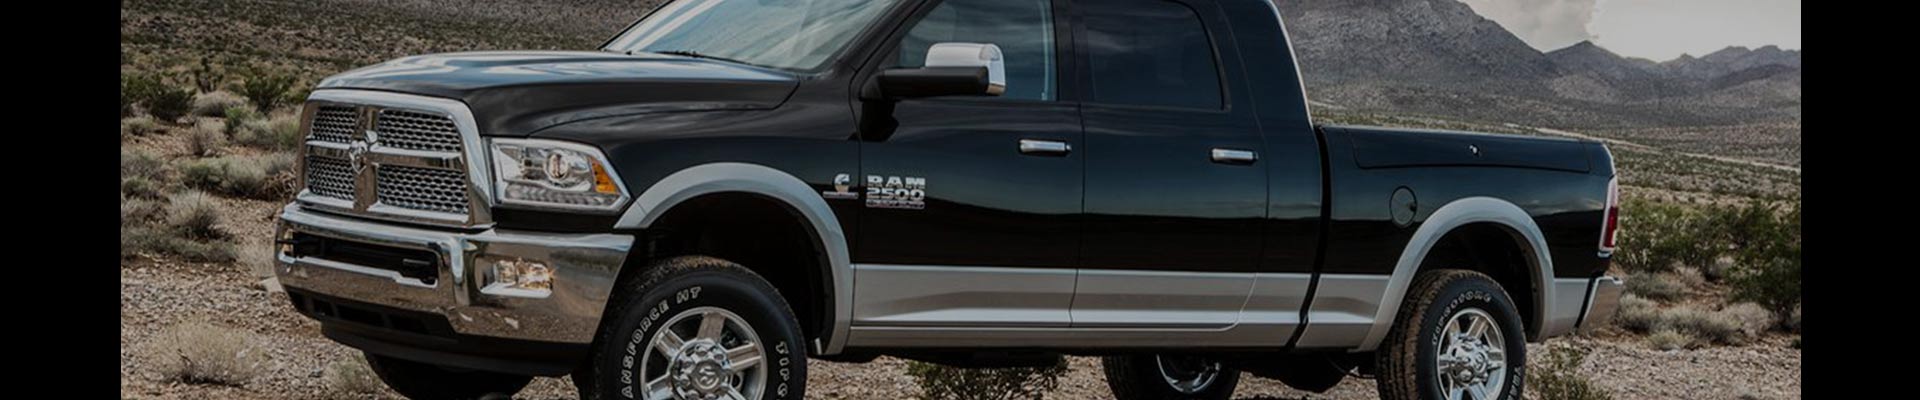 Shop Replacement and OEM 2019 Ram 2500 Parts with Discounted Price on the Net